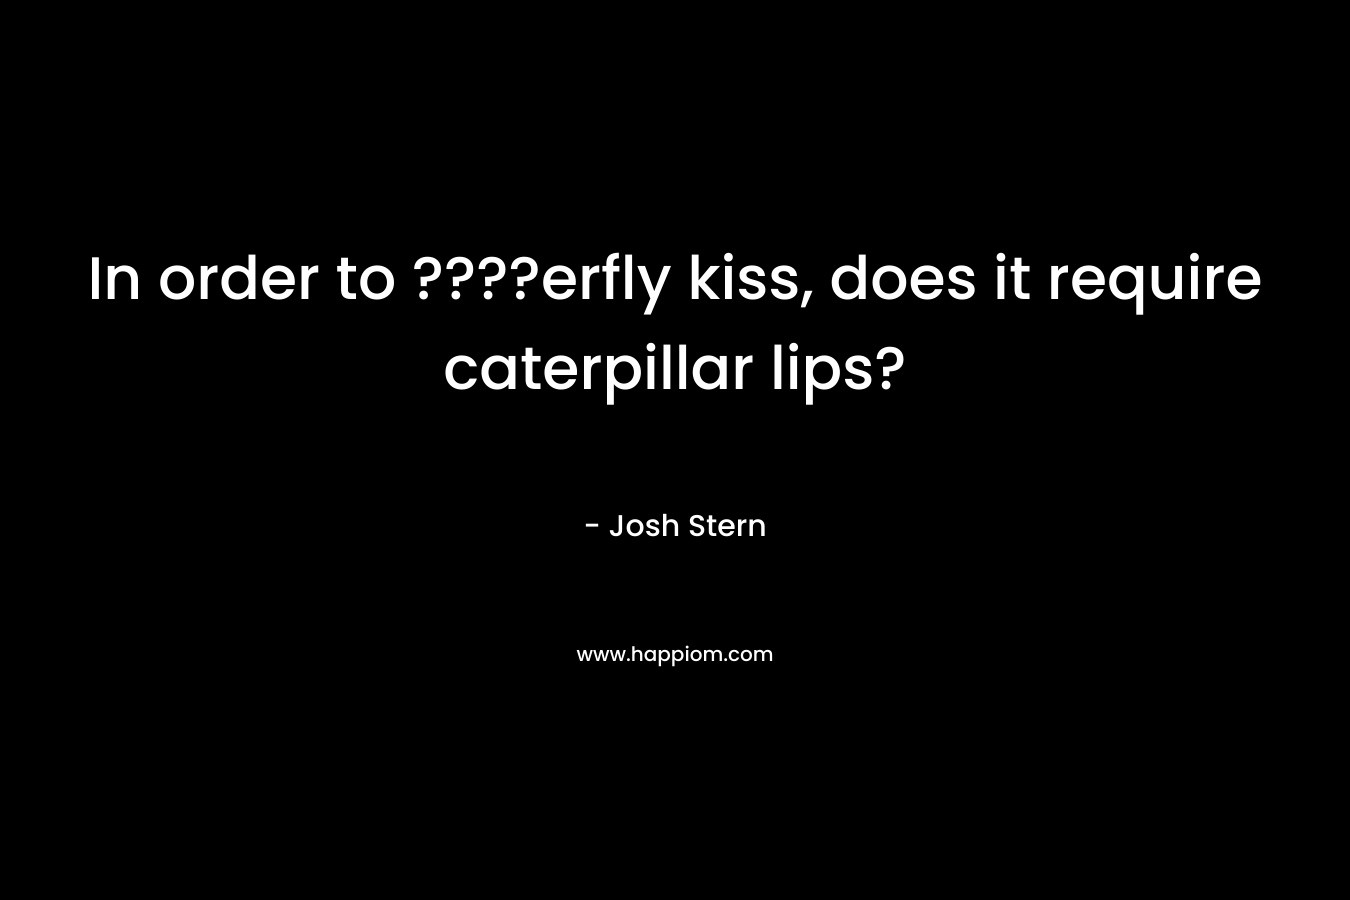 In order to ????erfly kiss, does it require caterpillar lips?